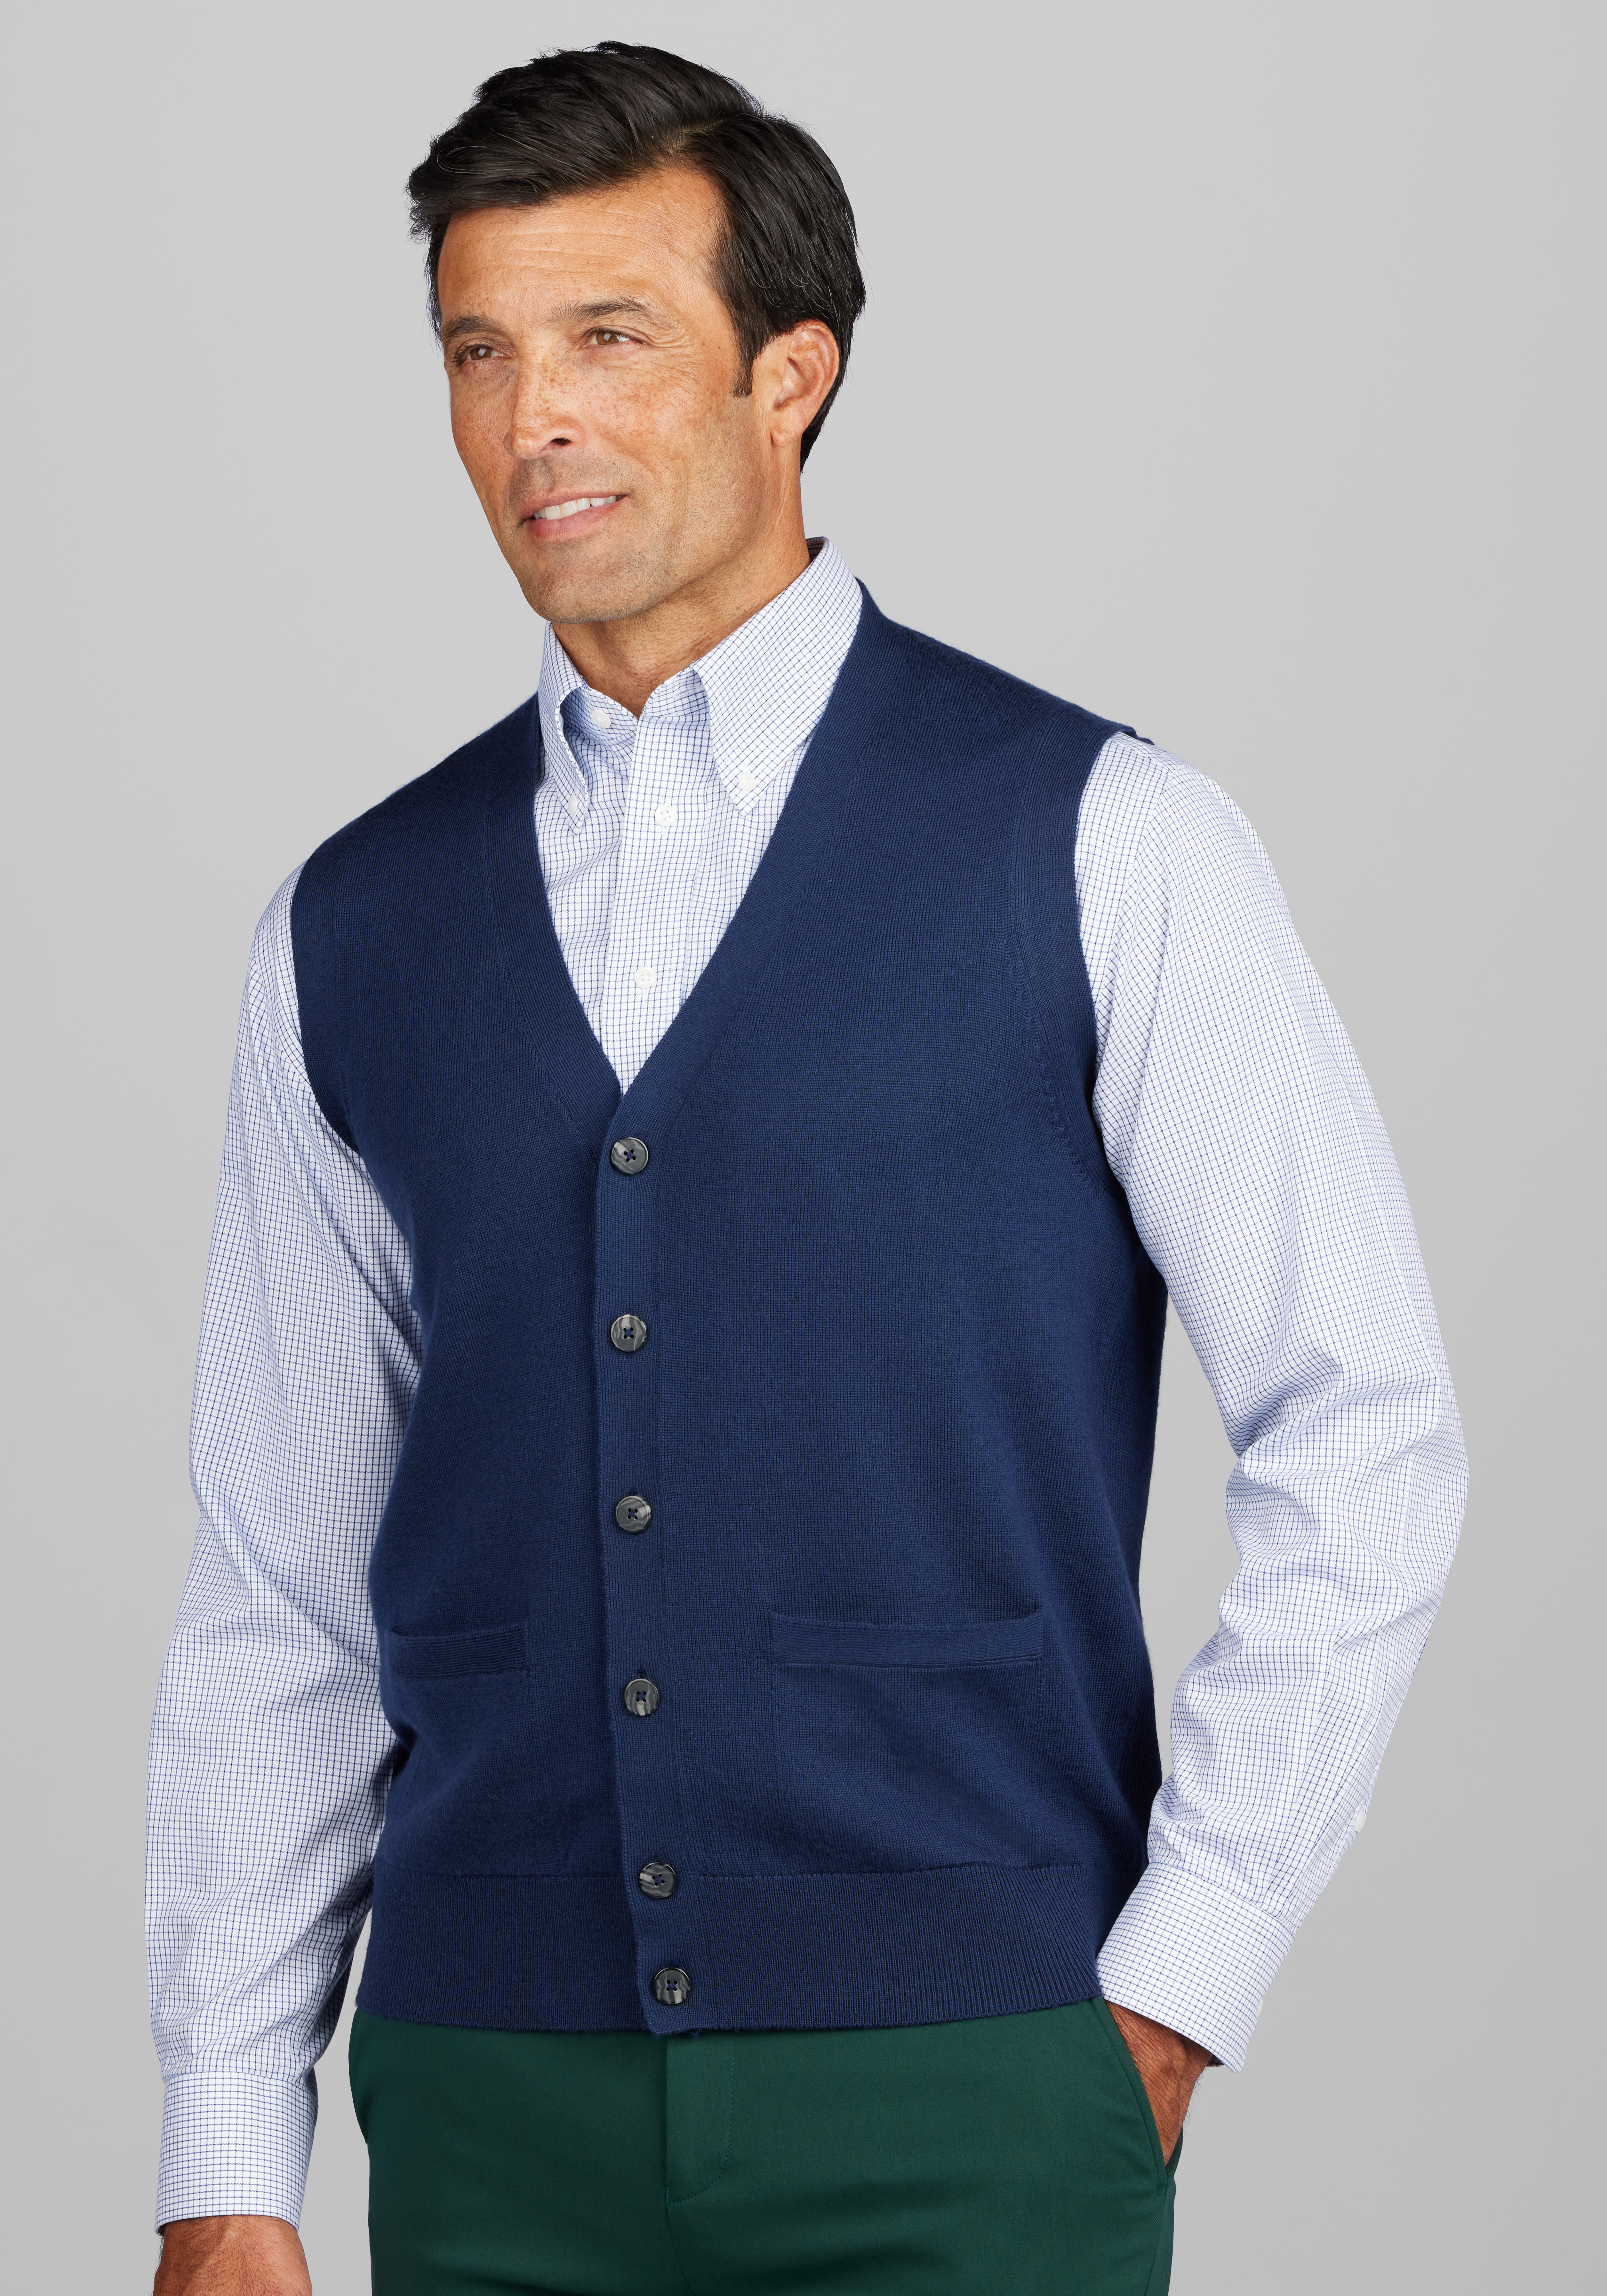 Jos. A. Bank Tailored Fit Merino Wool Sweater Vest - Big & Tall CLEARANCE